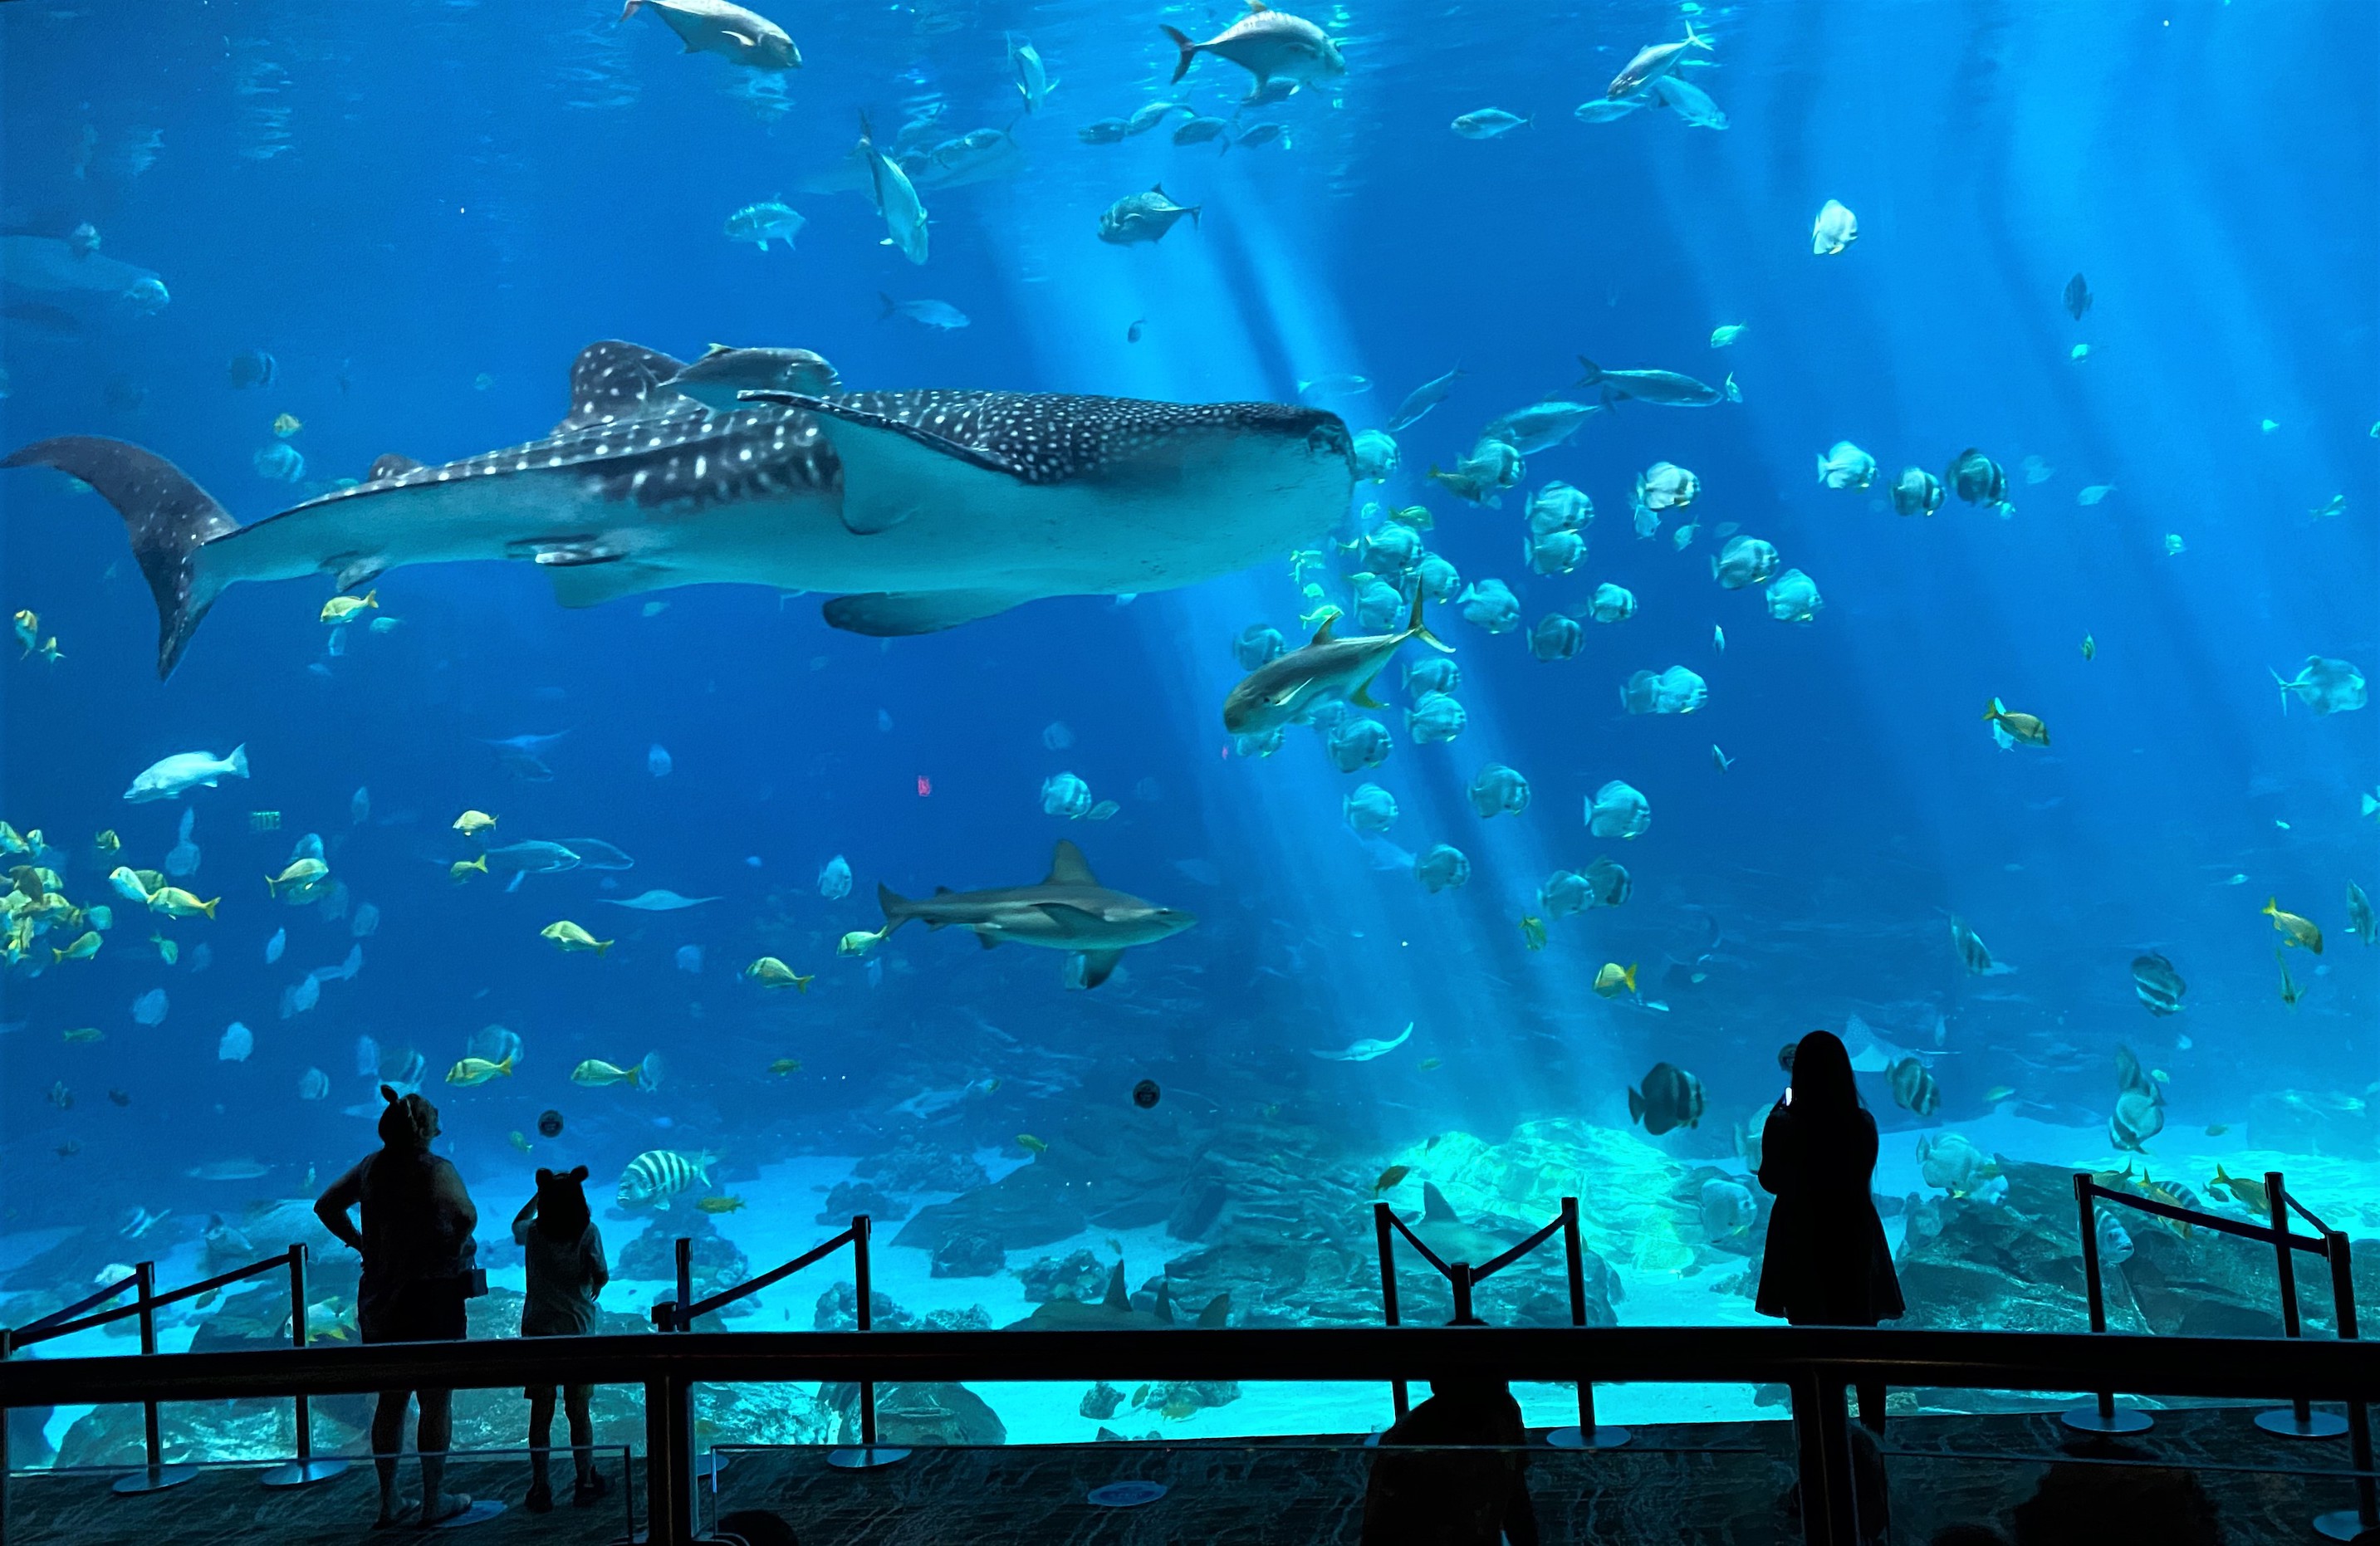 Aquarium Reopens with New Protocols to Support Guest Safety